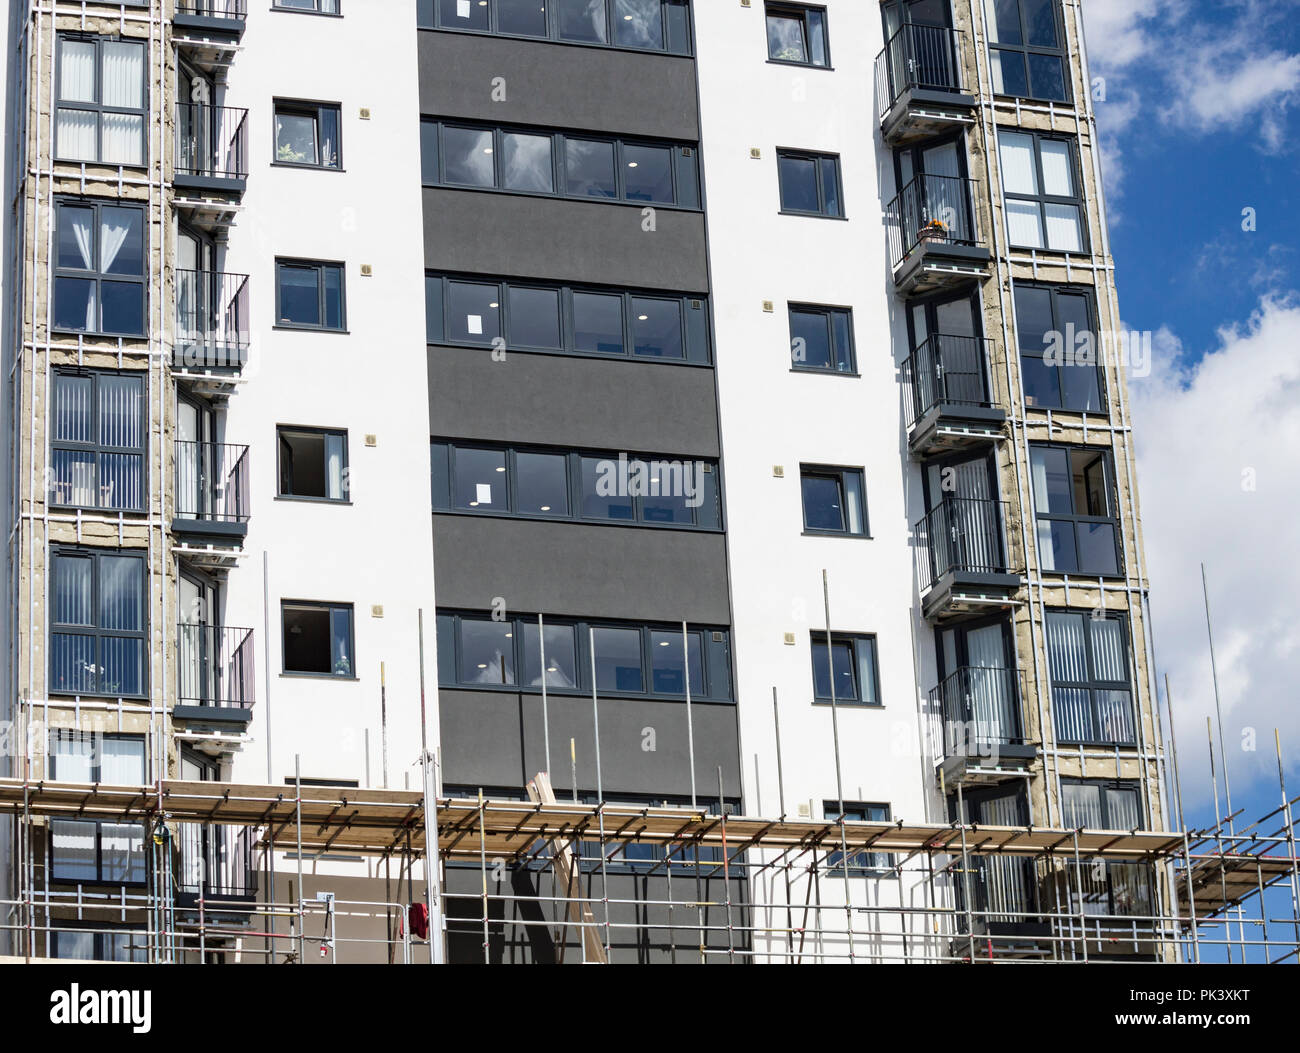 UK: Cladding being removed and replaced from tower blocks at Kennedy Gardens in Billingham, north east England. Stock Photo